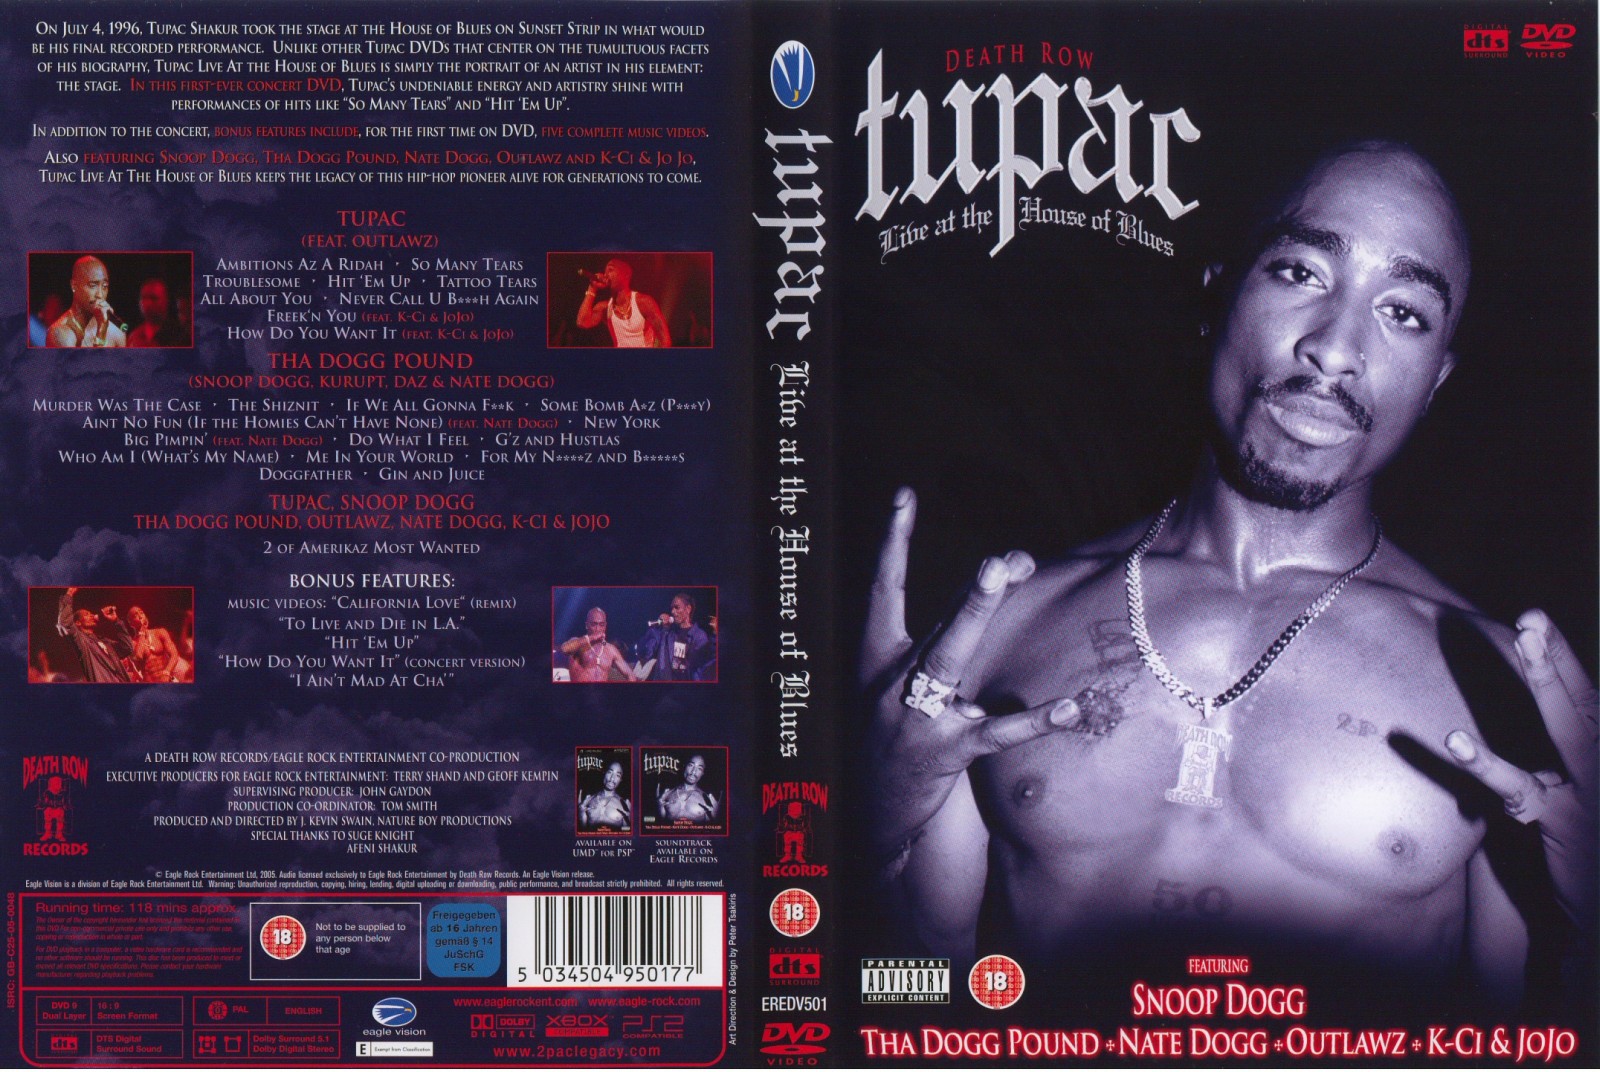 Jaquette DVD Tupac live at the house of blues